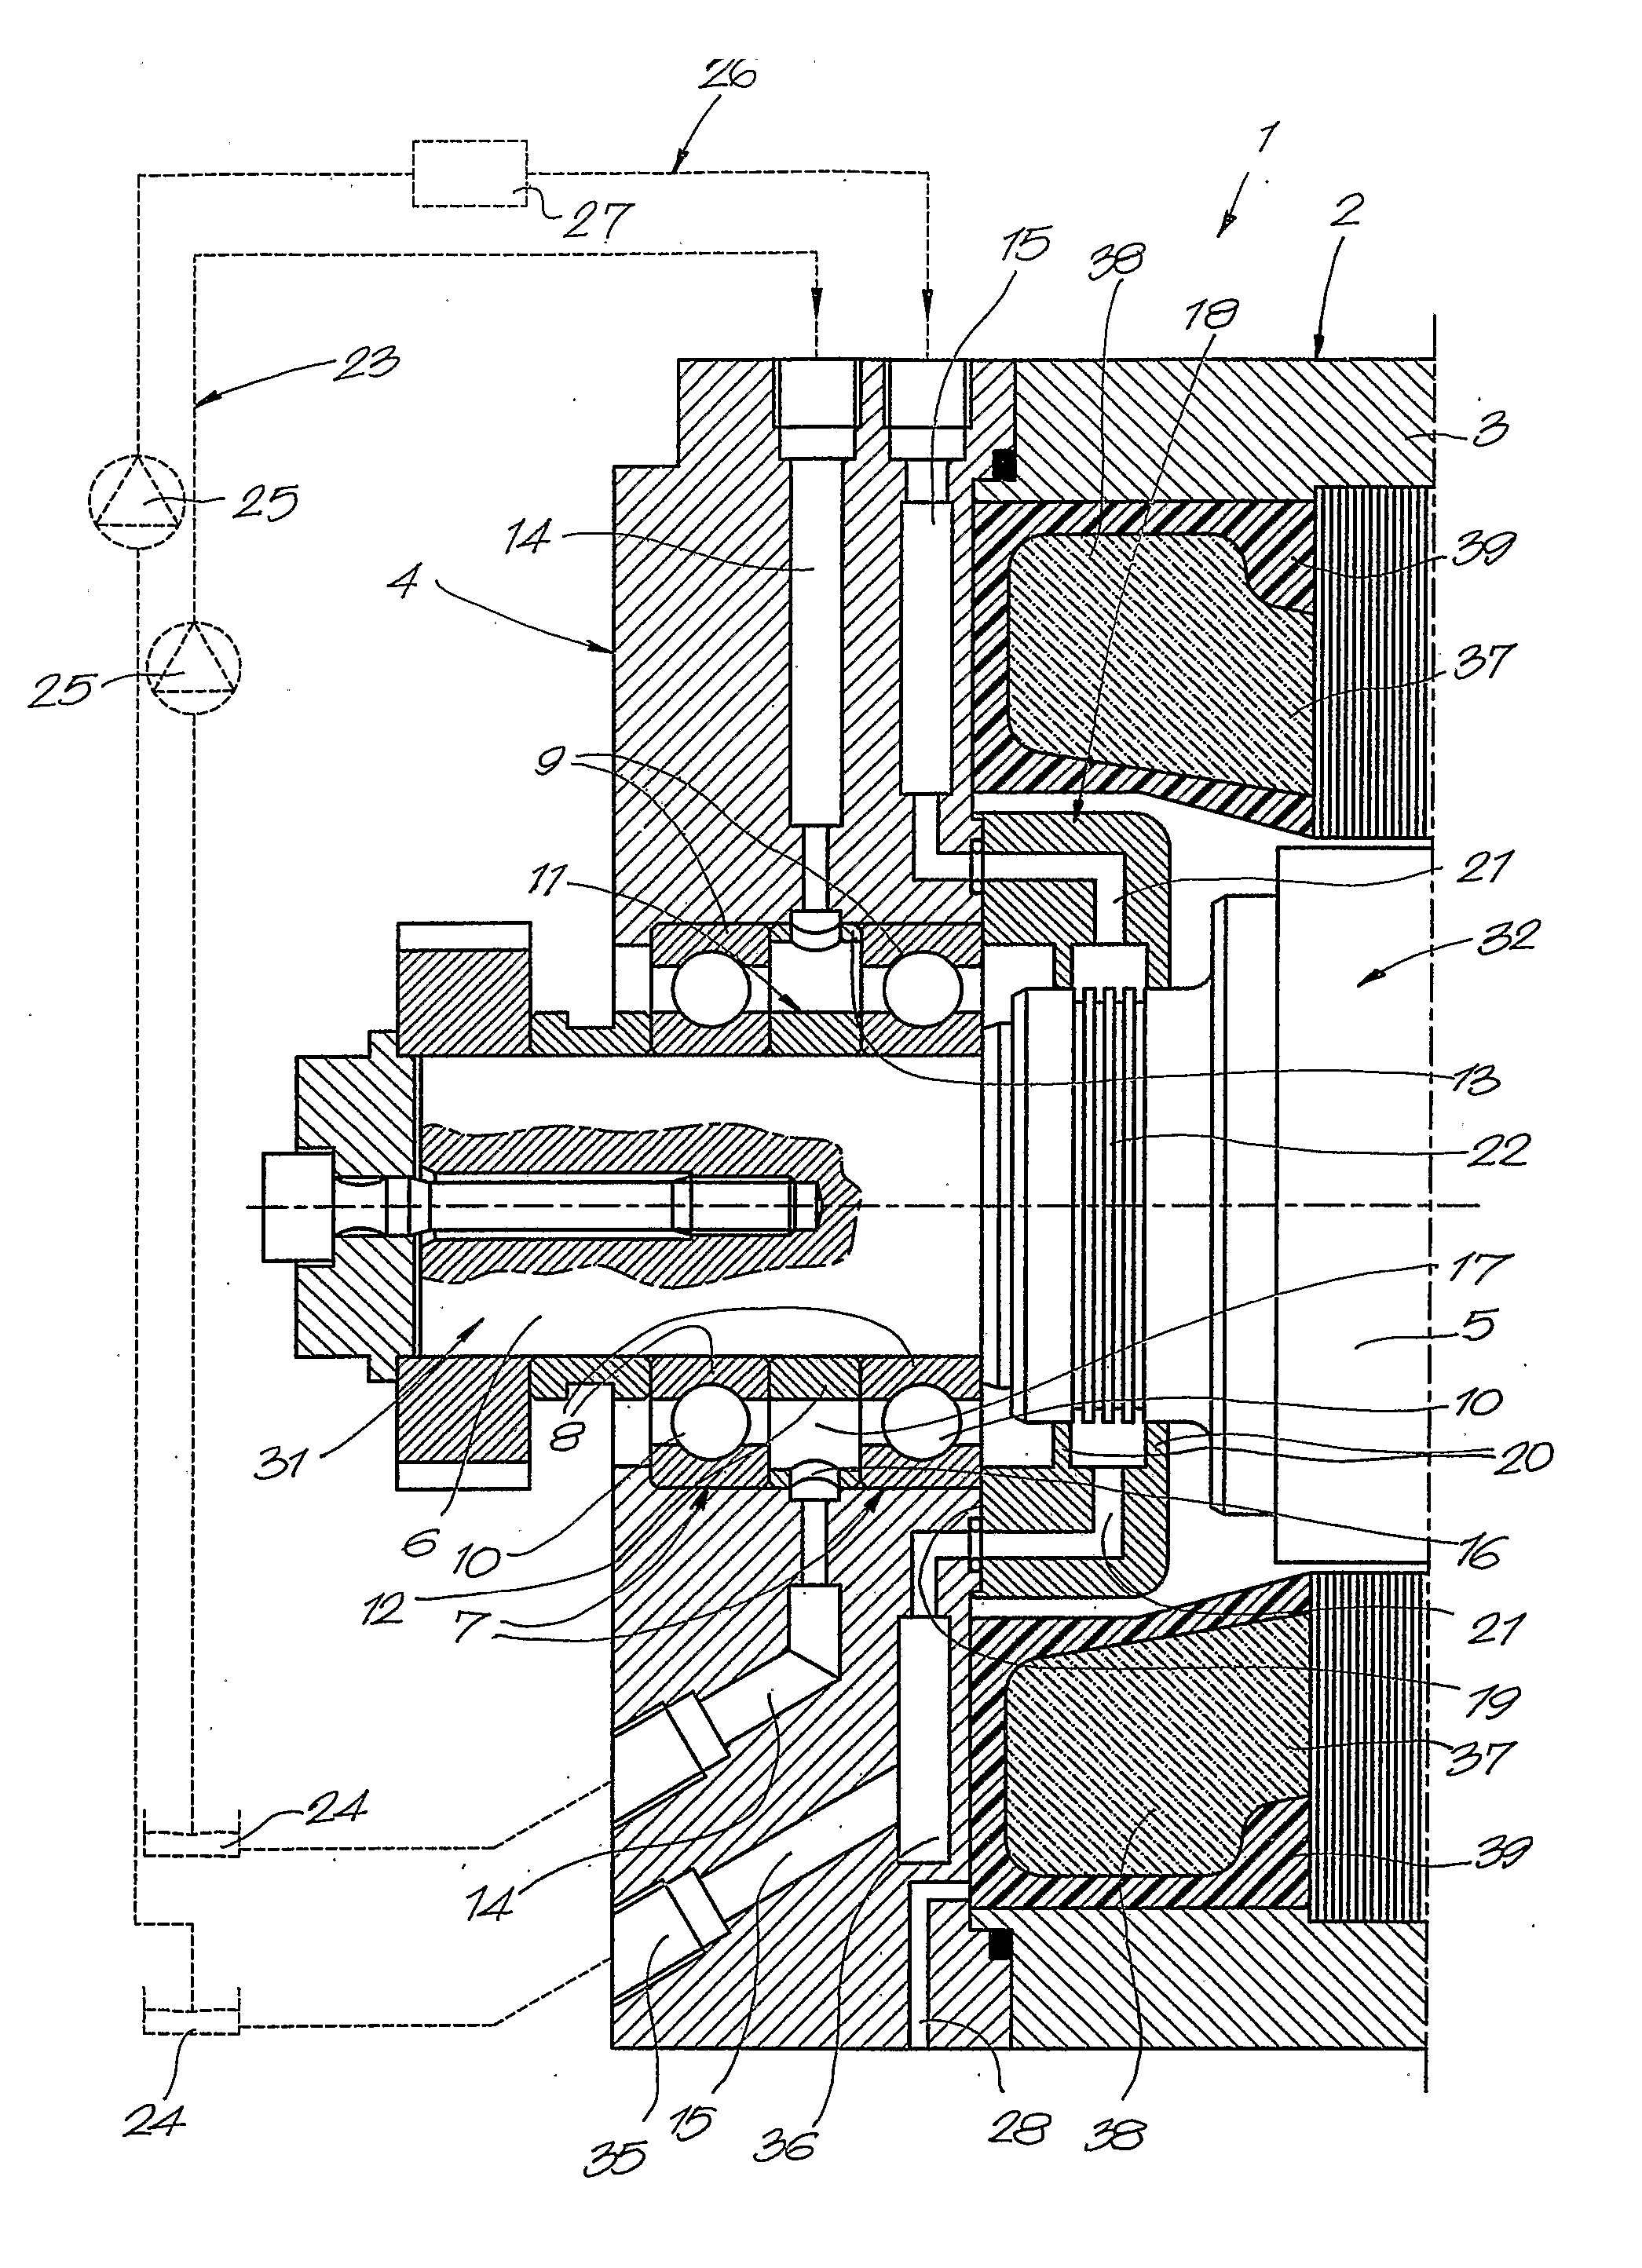 Machine with an improved bearing lubrication